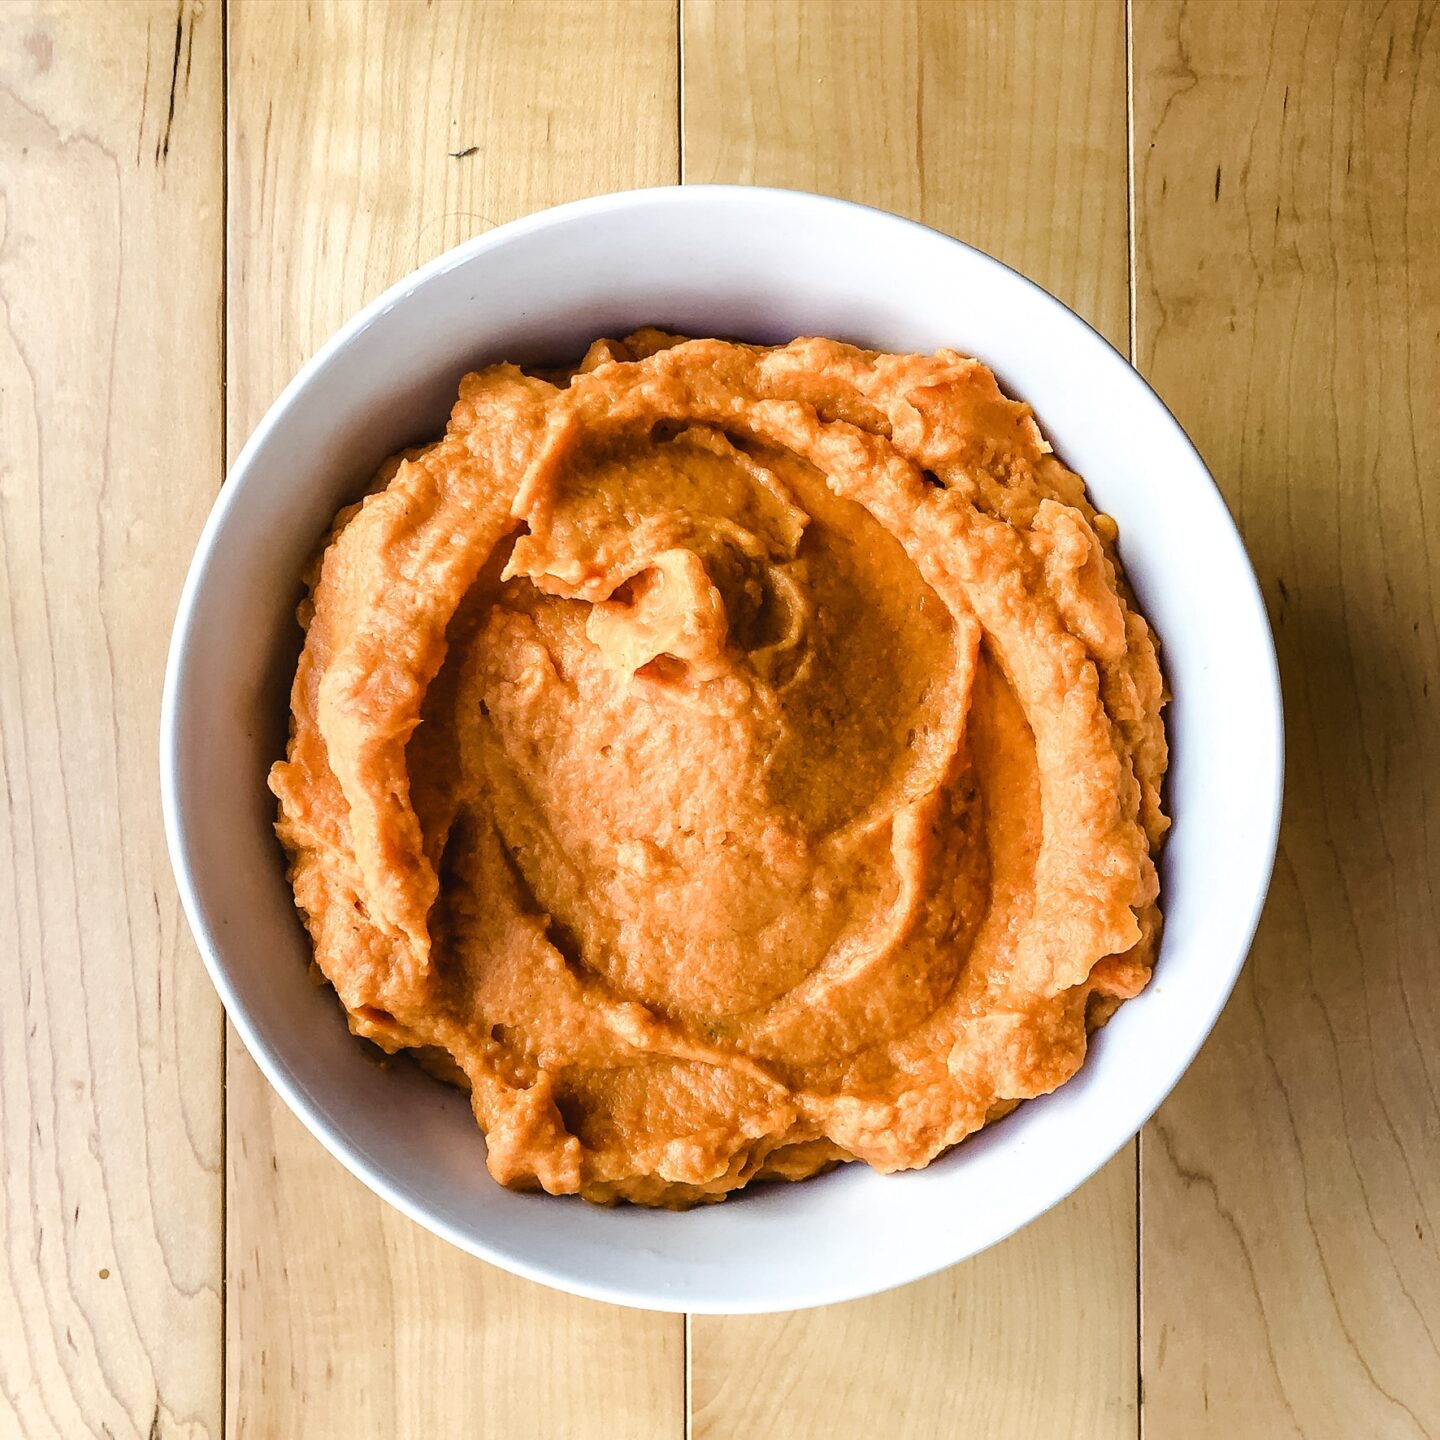 Mashed sweet potatoes in a bowl